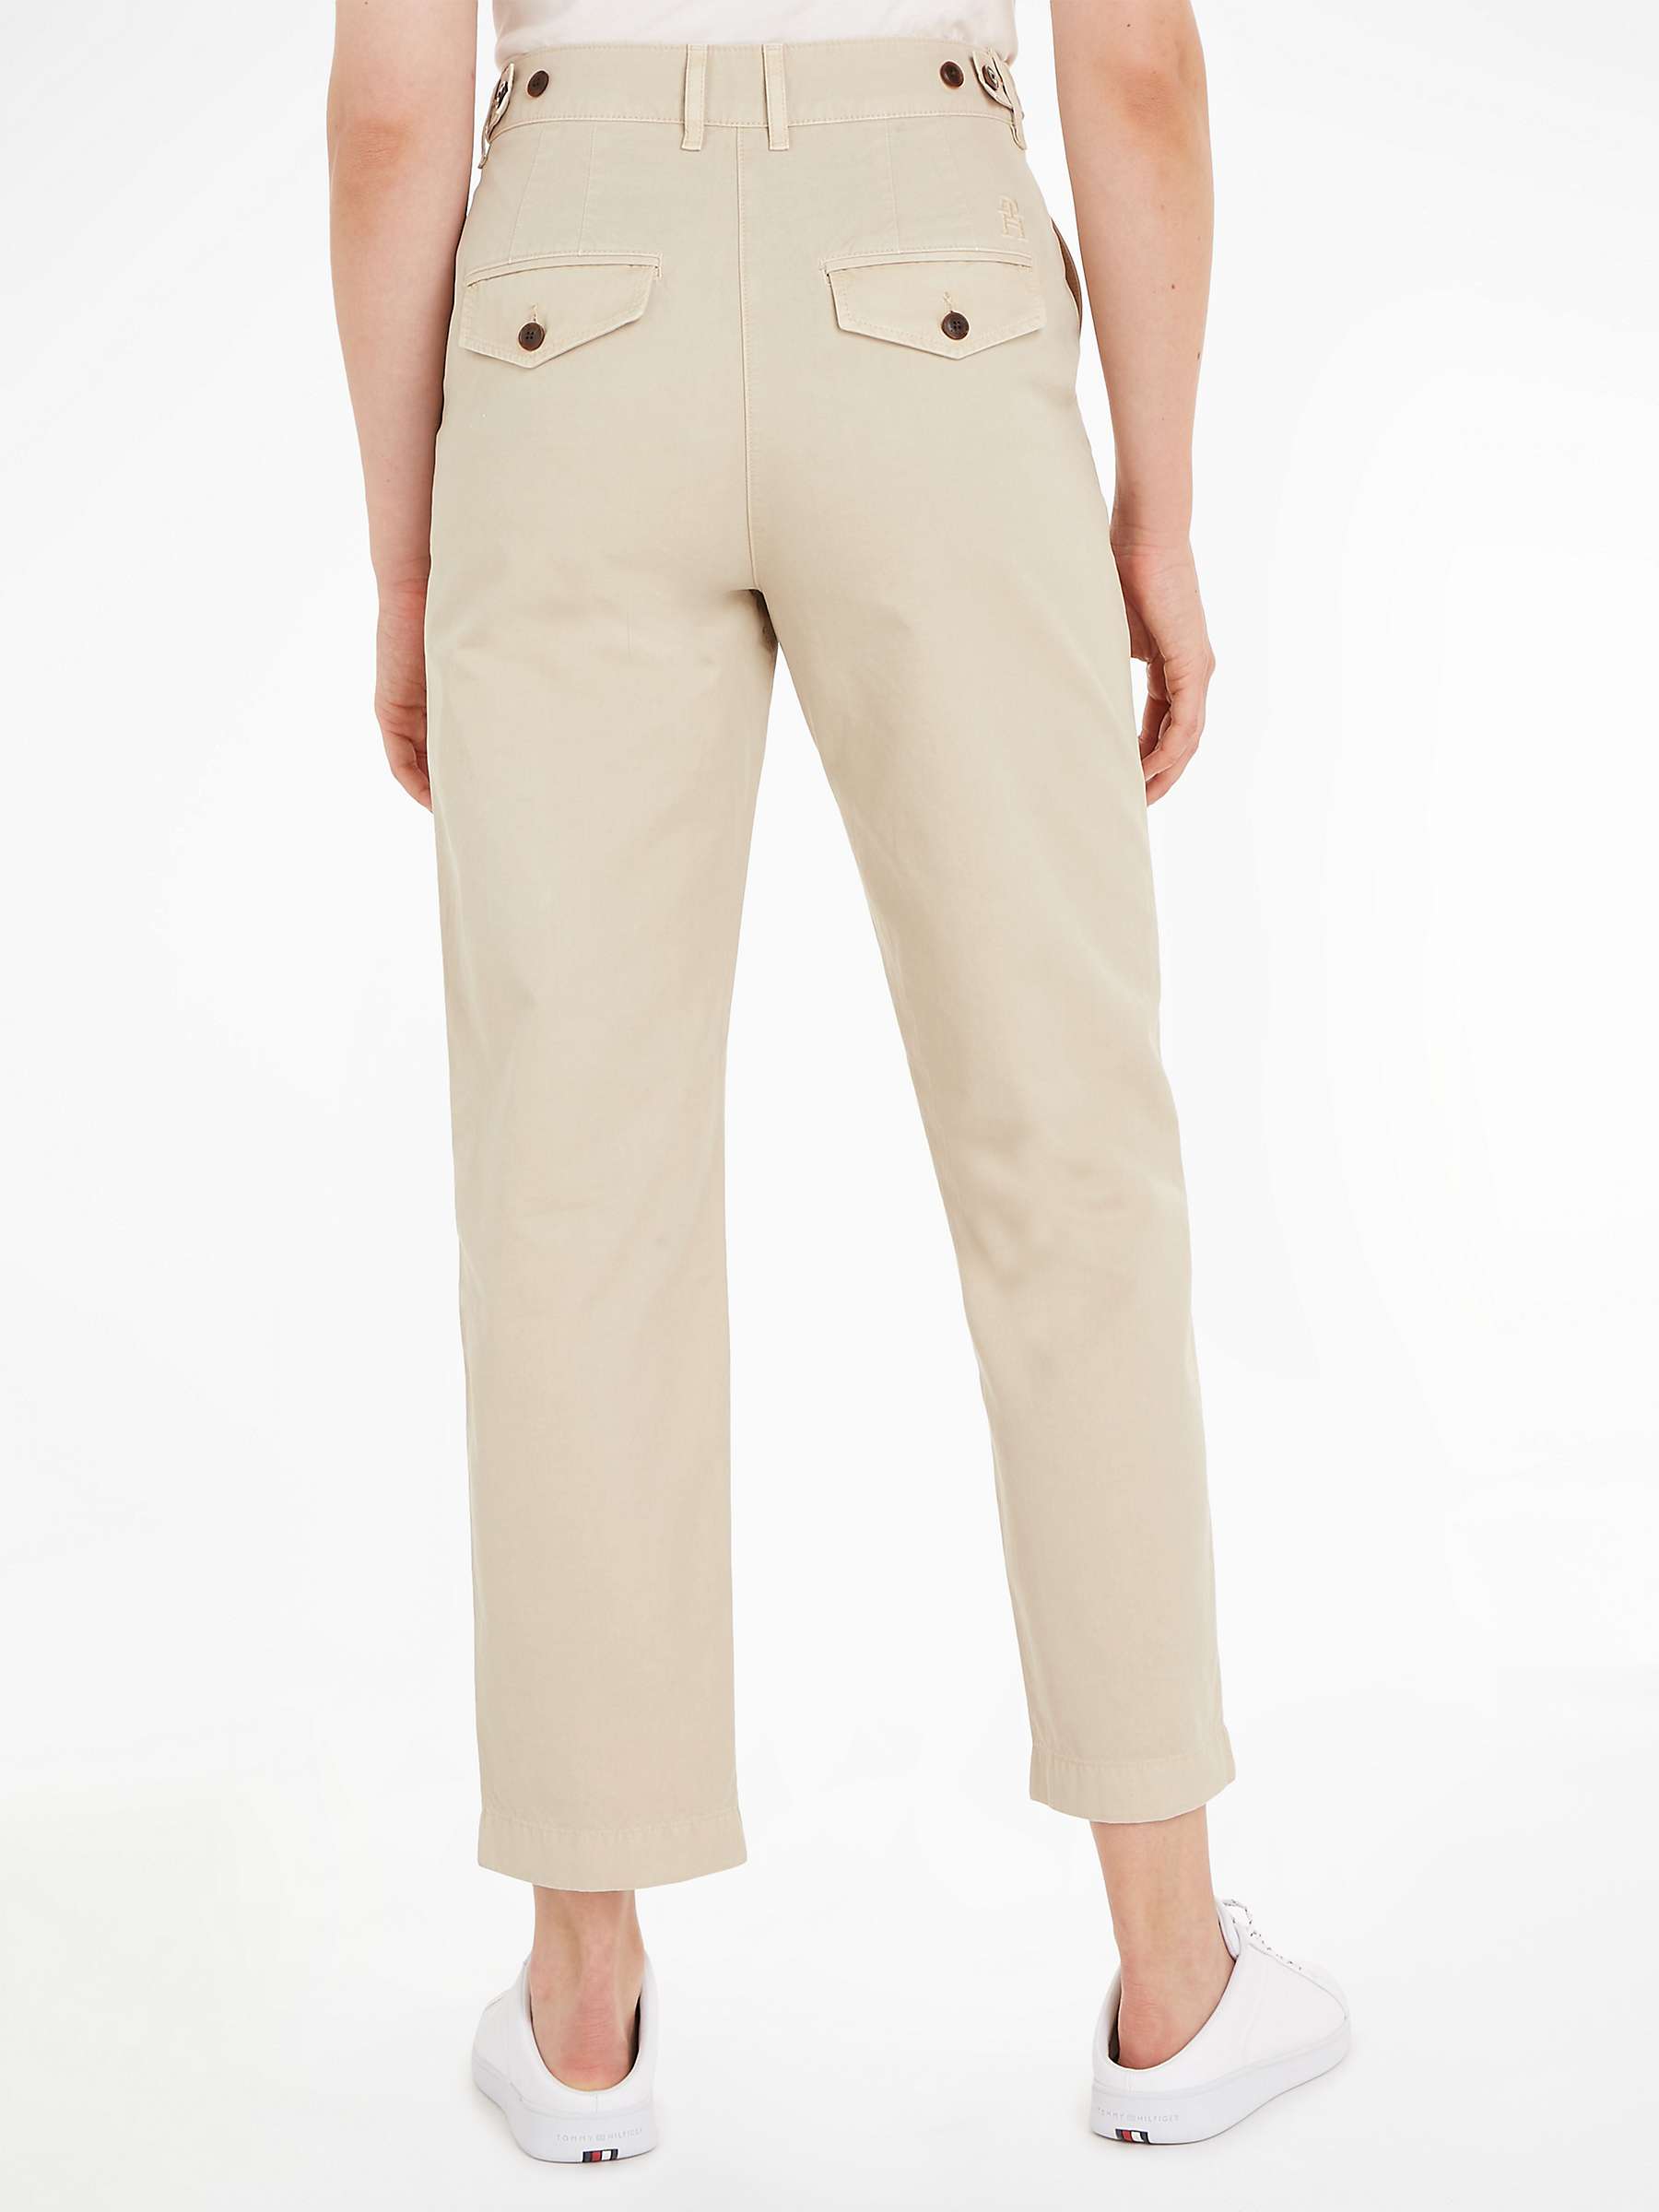 Buy Tommy Hilfiger Tapered Chino Trousers, Light Sandalwood Online at johnlewis.com